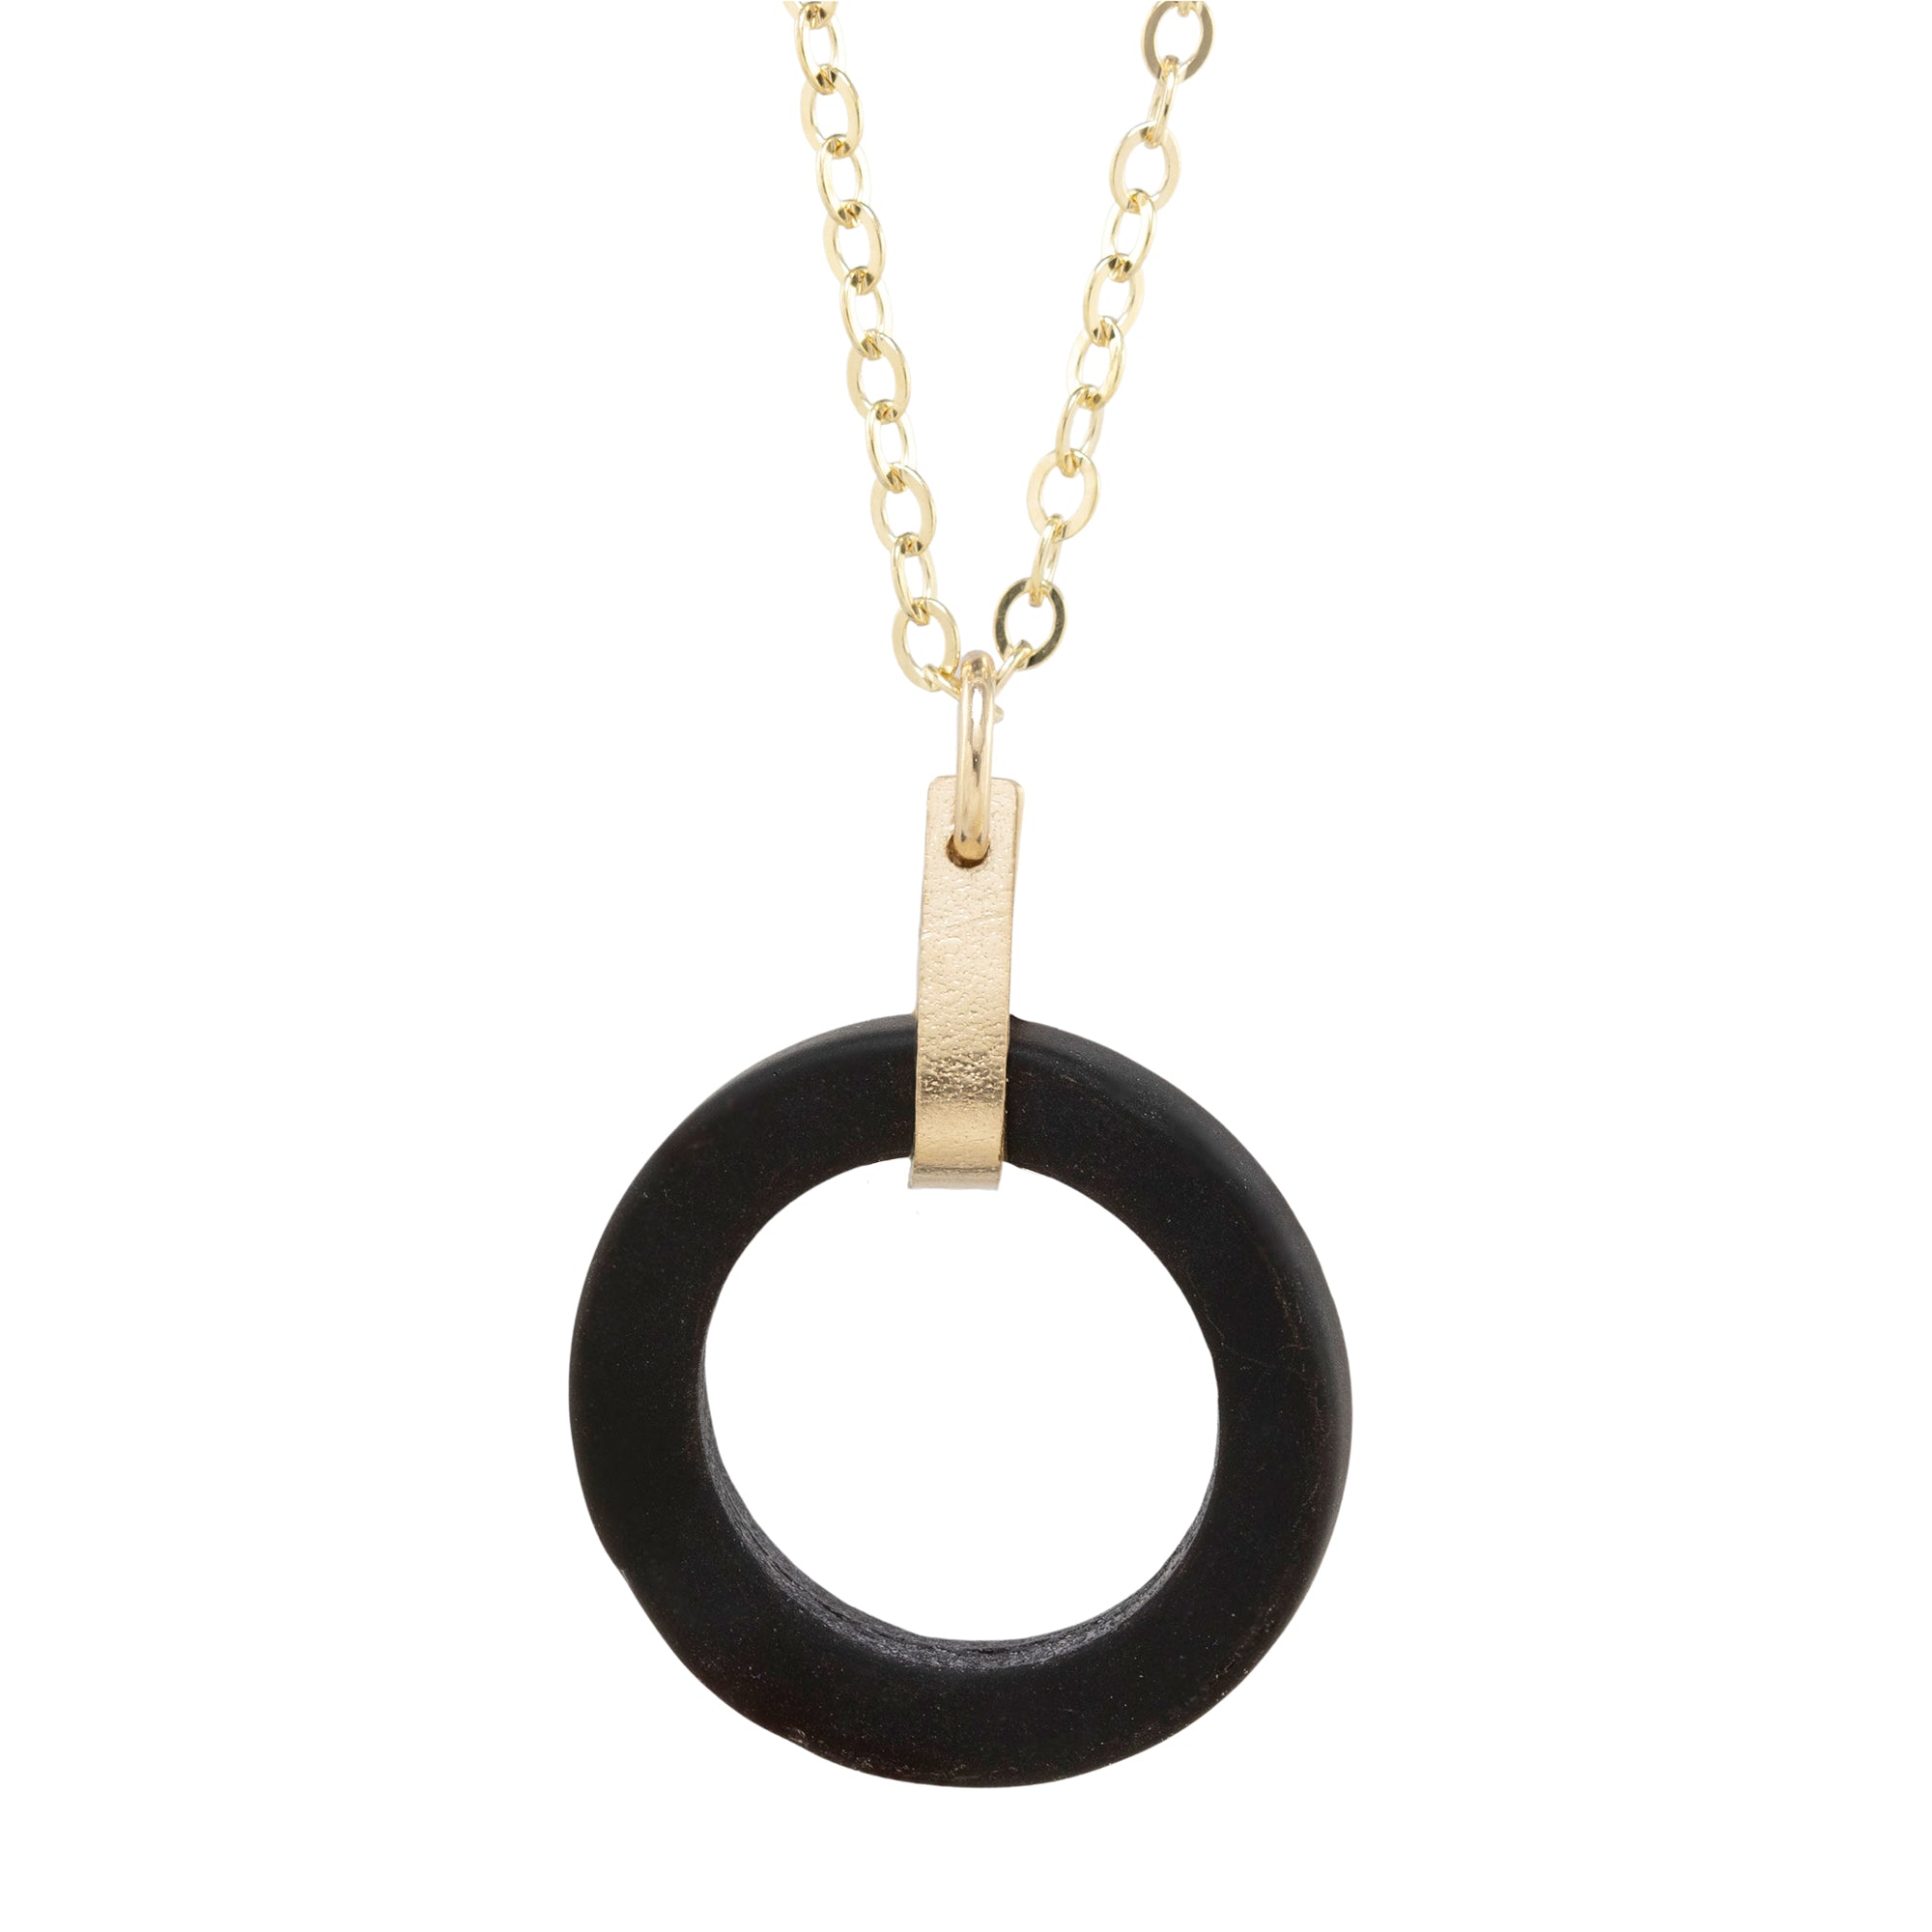 Matte Black Round Recycled Glass Open Circle and 14K Gold Fill Strap Style Pendant Necklace